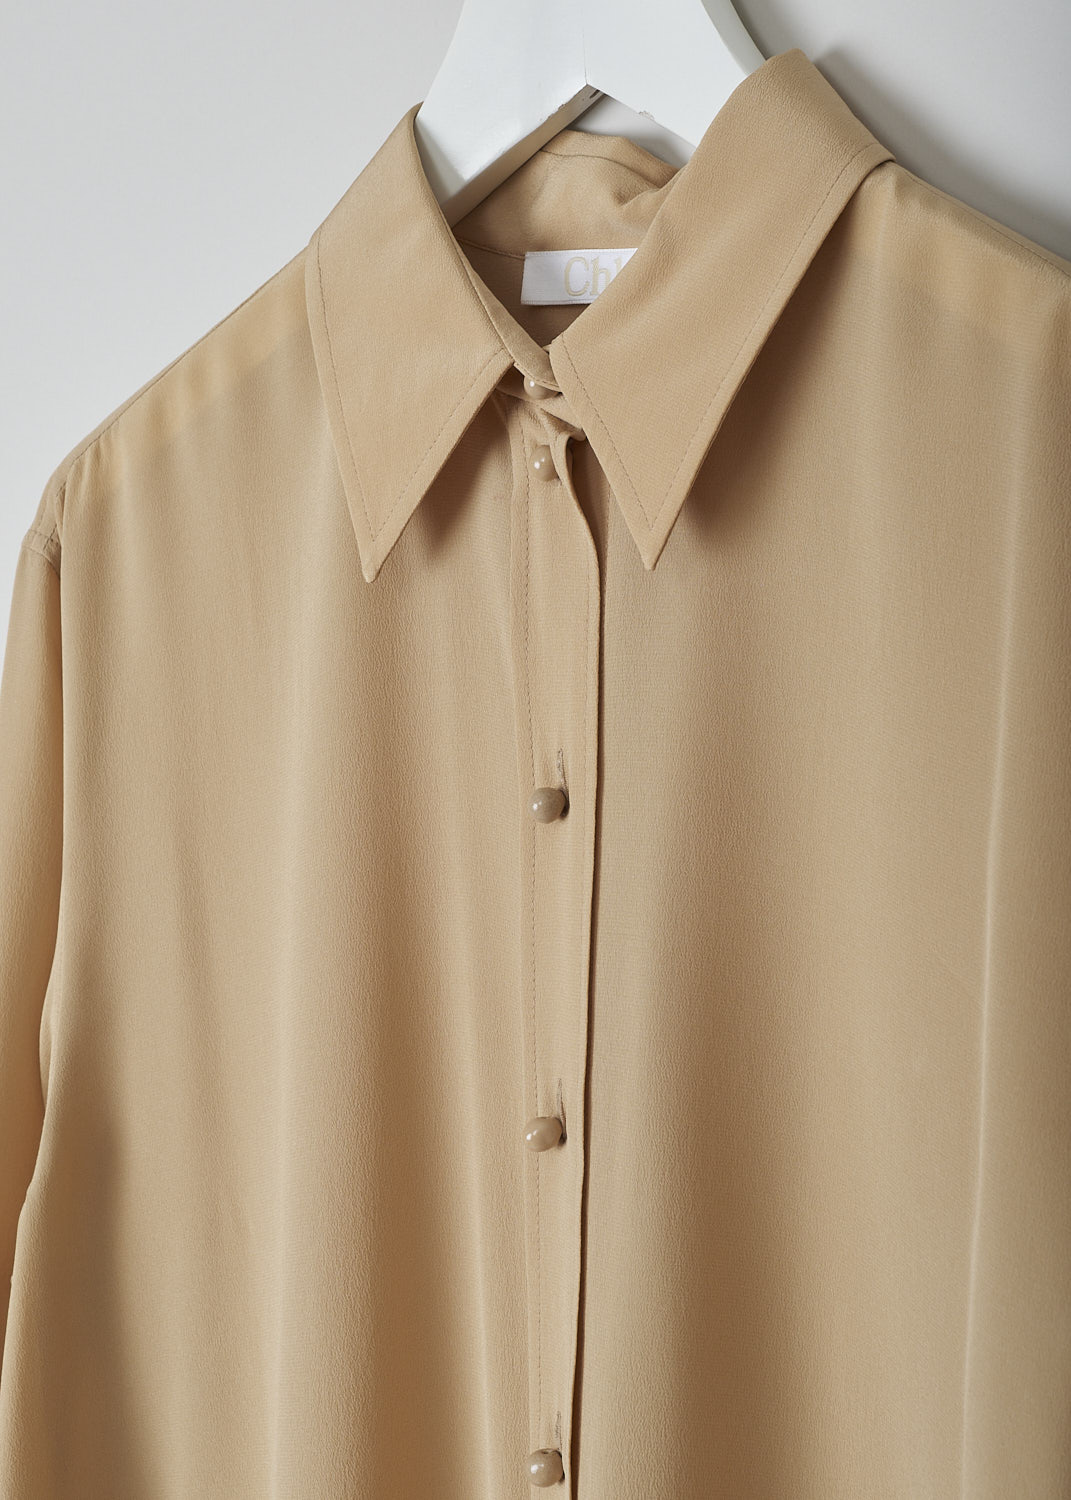 CHLOÉ, PEARL BEIGE BLOUSE, CHC22UHT05004278, Beige, Detail, This silk pearl beige blouse has a classic collar and a button placket with round ceramic. The blouse has long sleeves with buttoned cuffs.  A centre box pleat runs vertically down the back.
